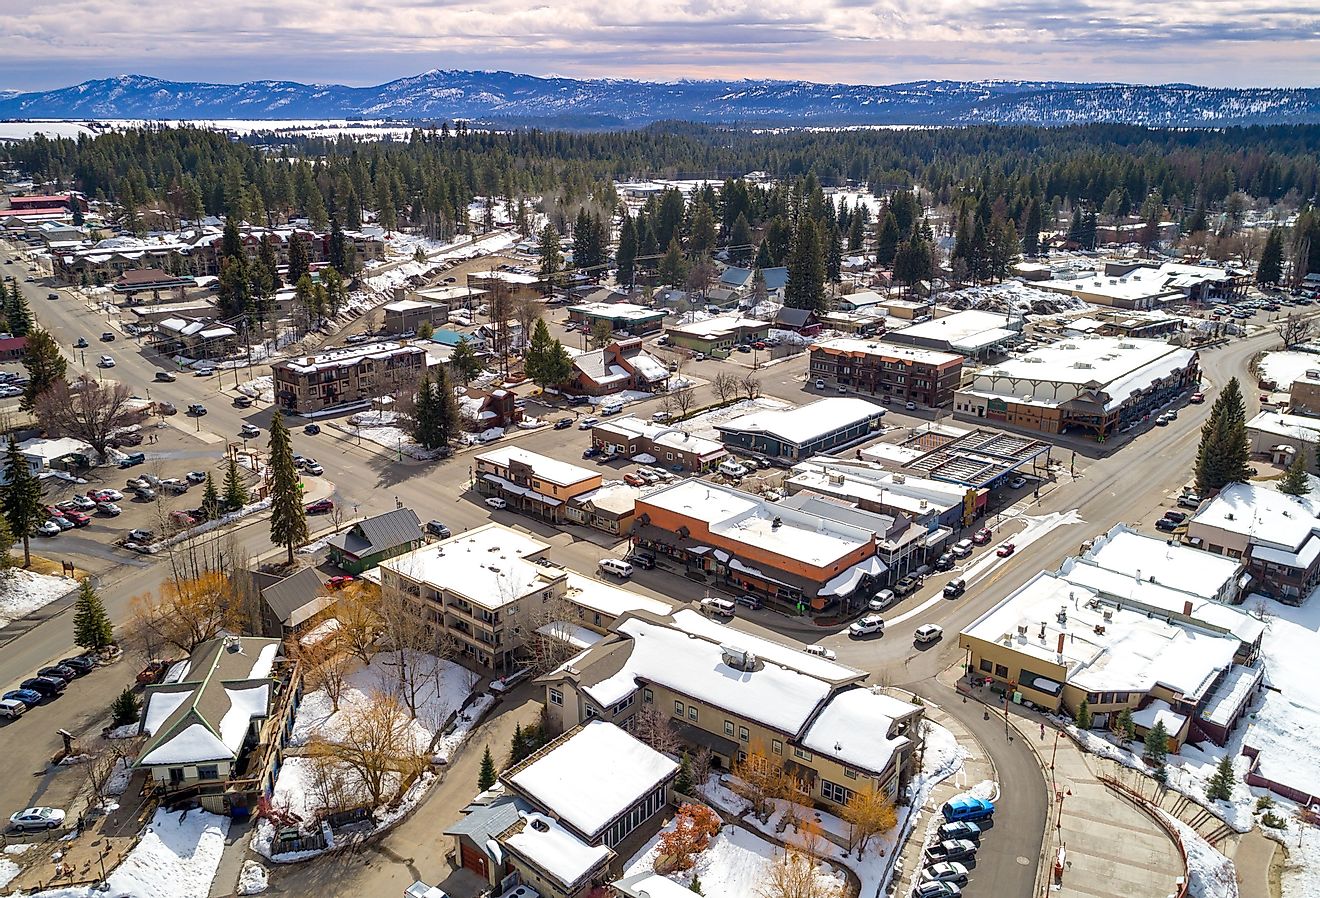 Little mountain town of McCall Idaho in winter. Image credit Charles Knowles via Shutterstock